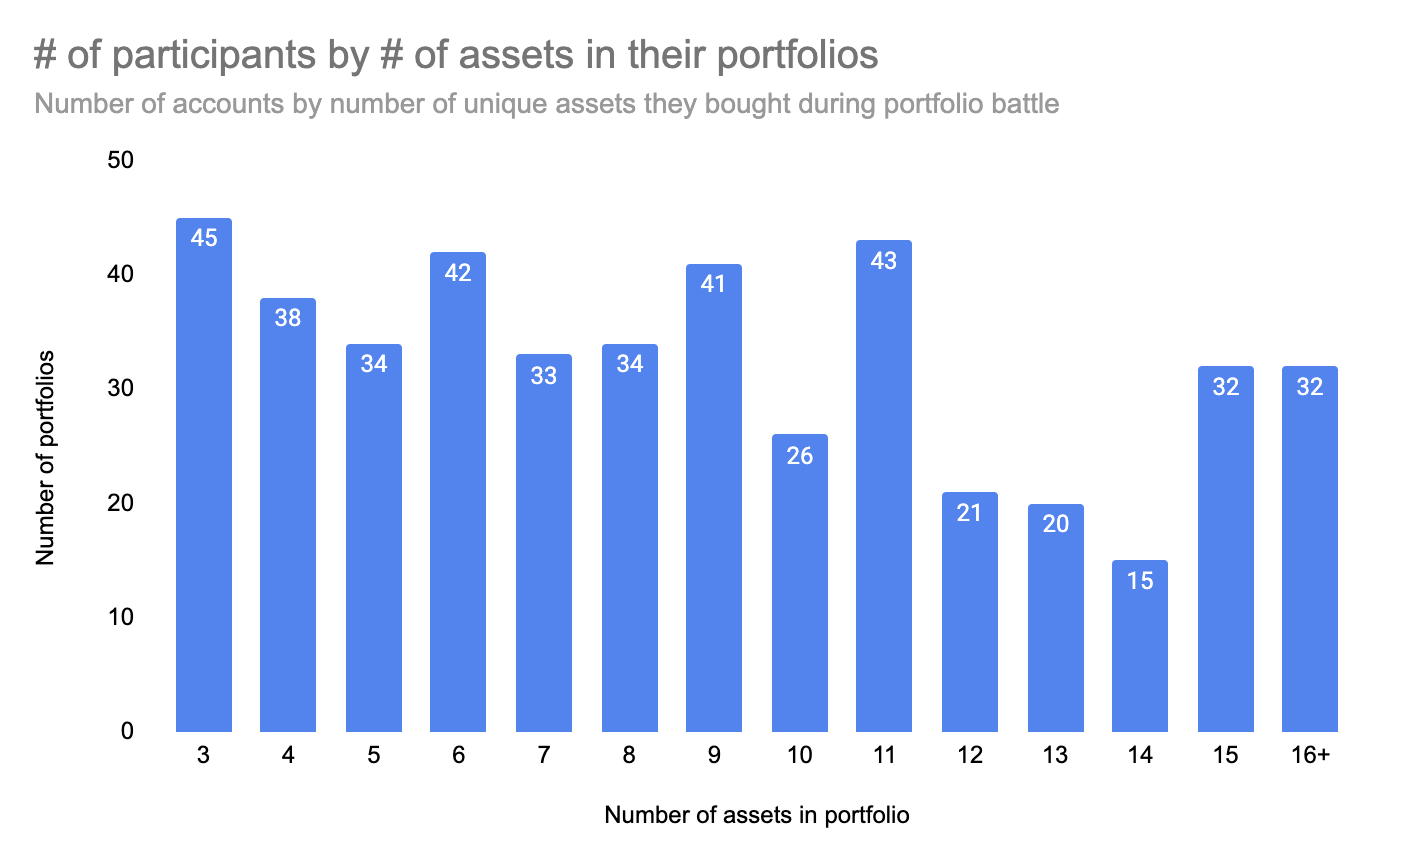 # of accounts grouped by number of assets they included in their portfolios